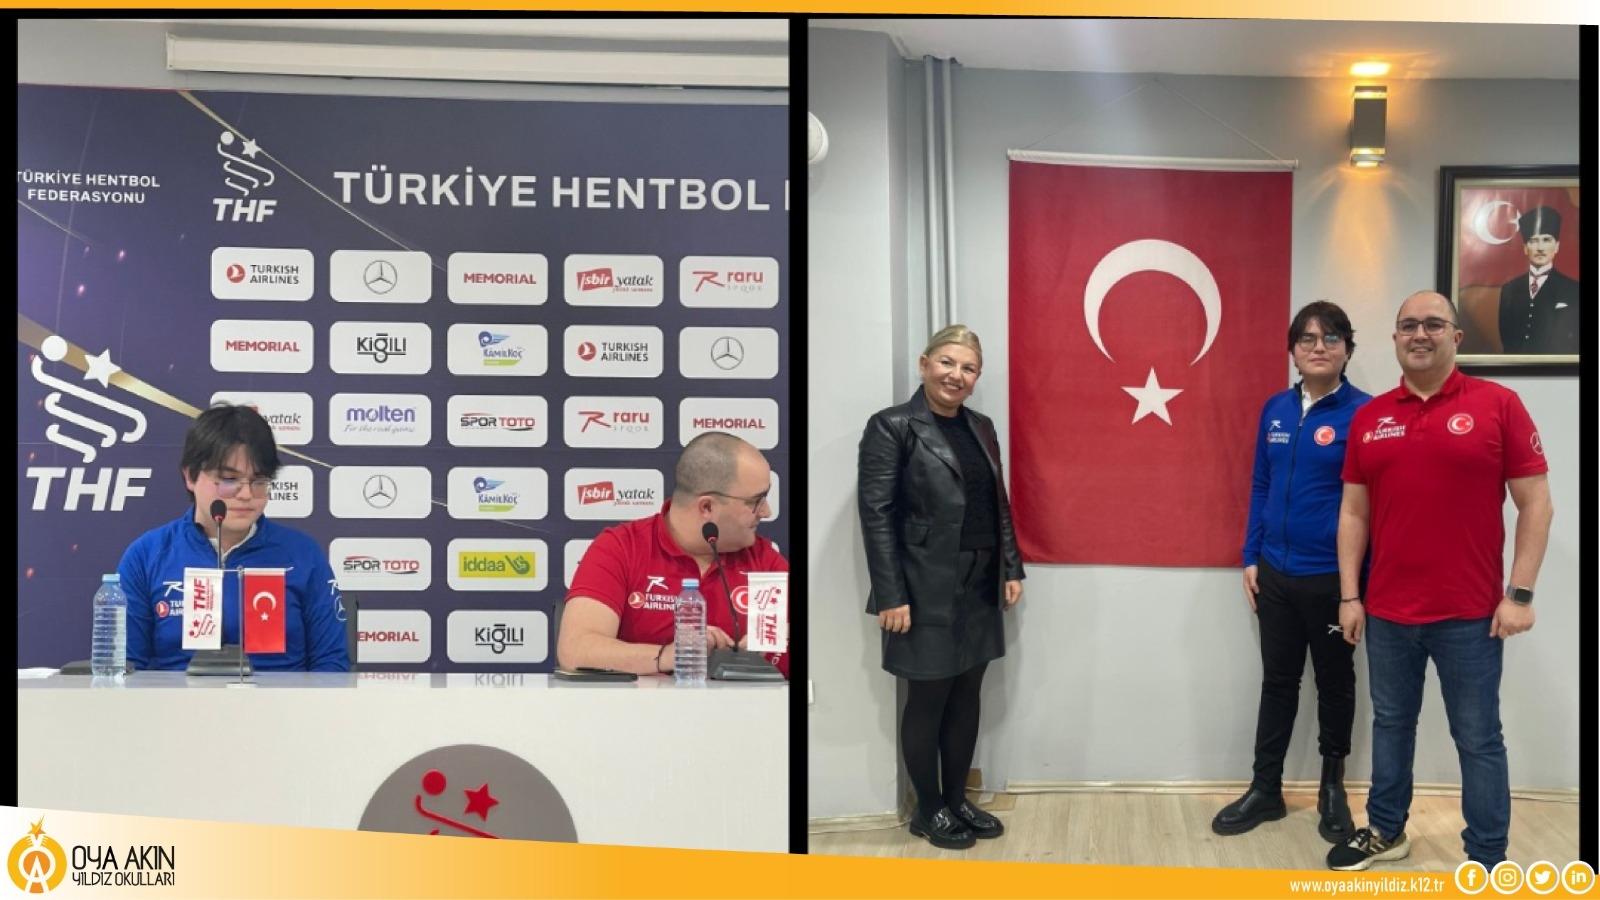 Our Student Ali İhsan Koçoğlu Was Responsible For Simultaneous Translation In Its Signing Ceremony